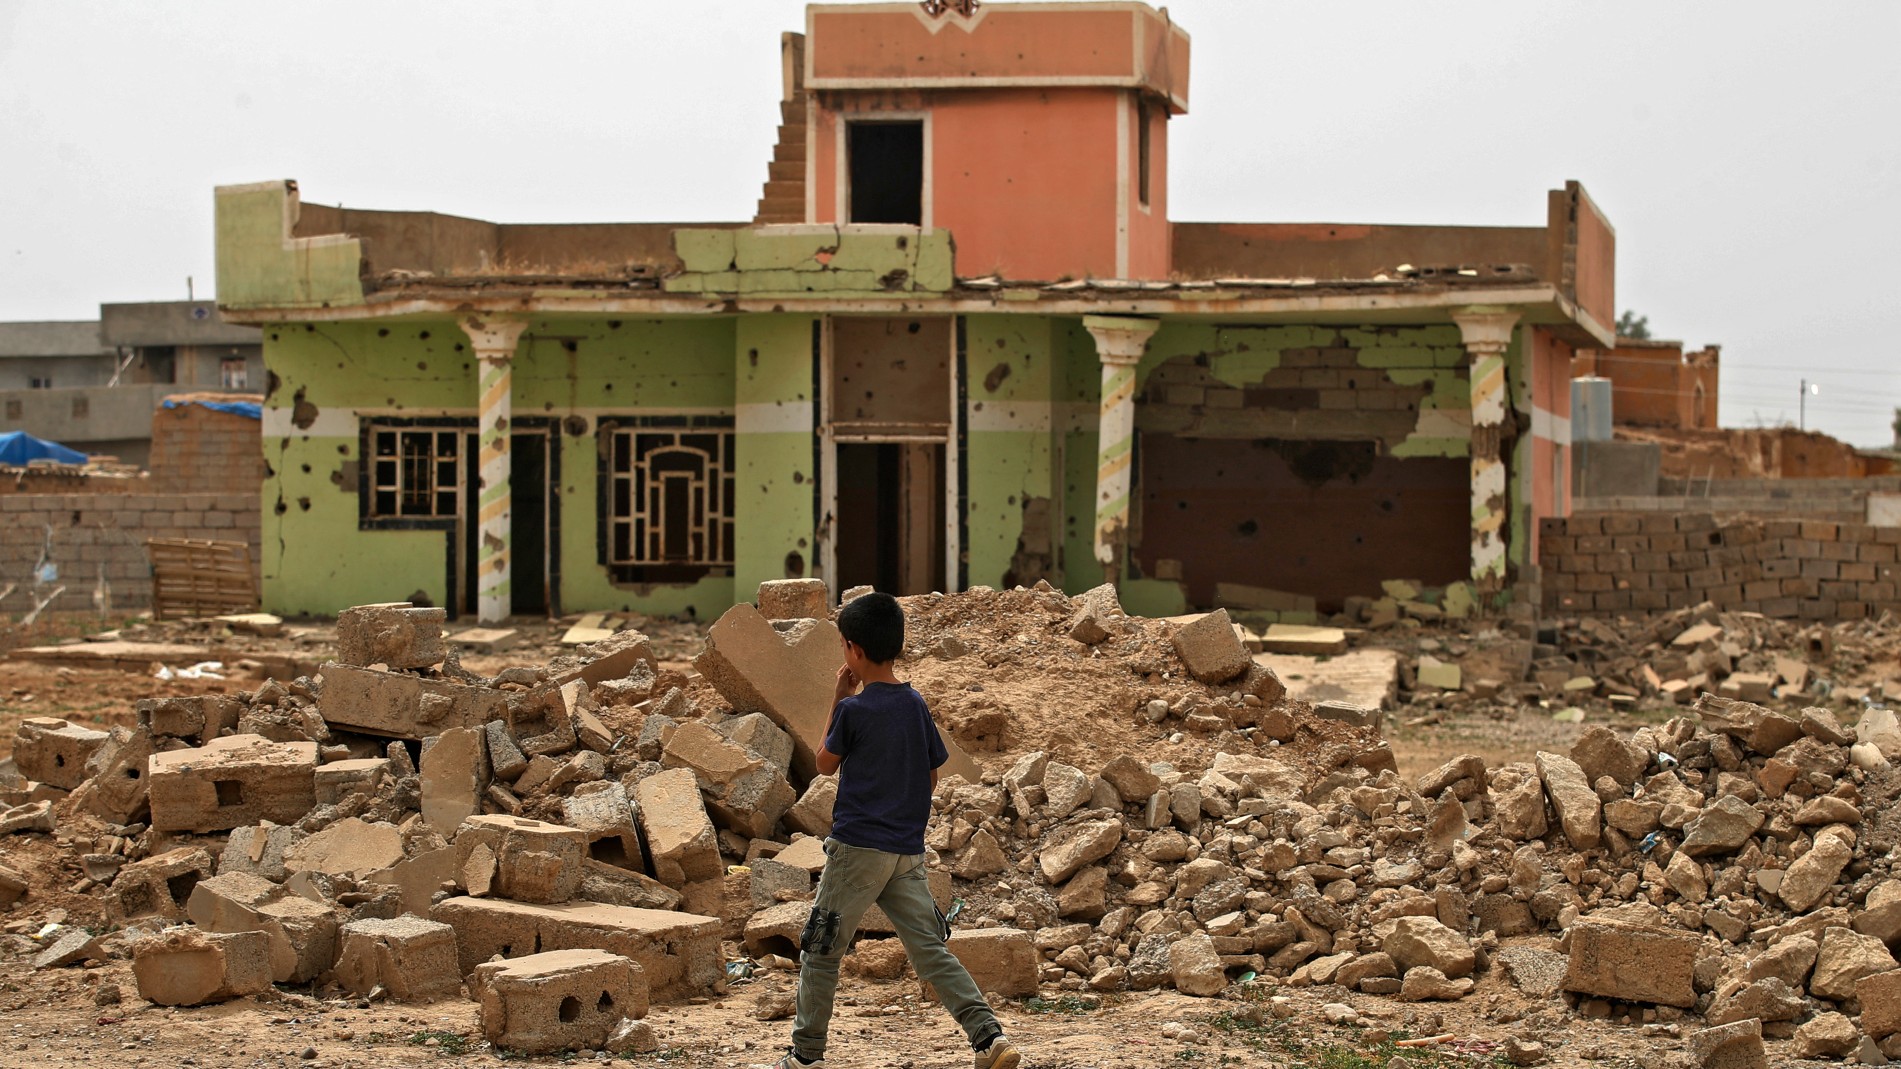 A boy walks past a destroyed house in the war-ravaged village of Habash, some 180 kilometres north of Iraq's capital Baghdad, on 25 April, 2022.